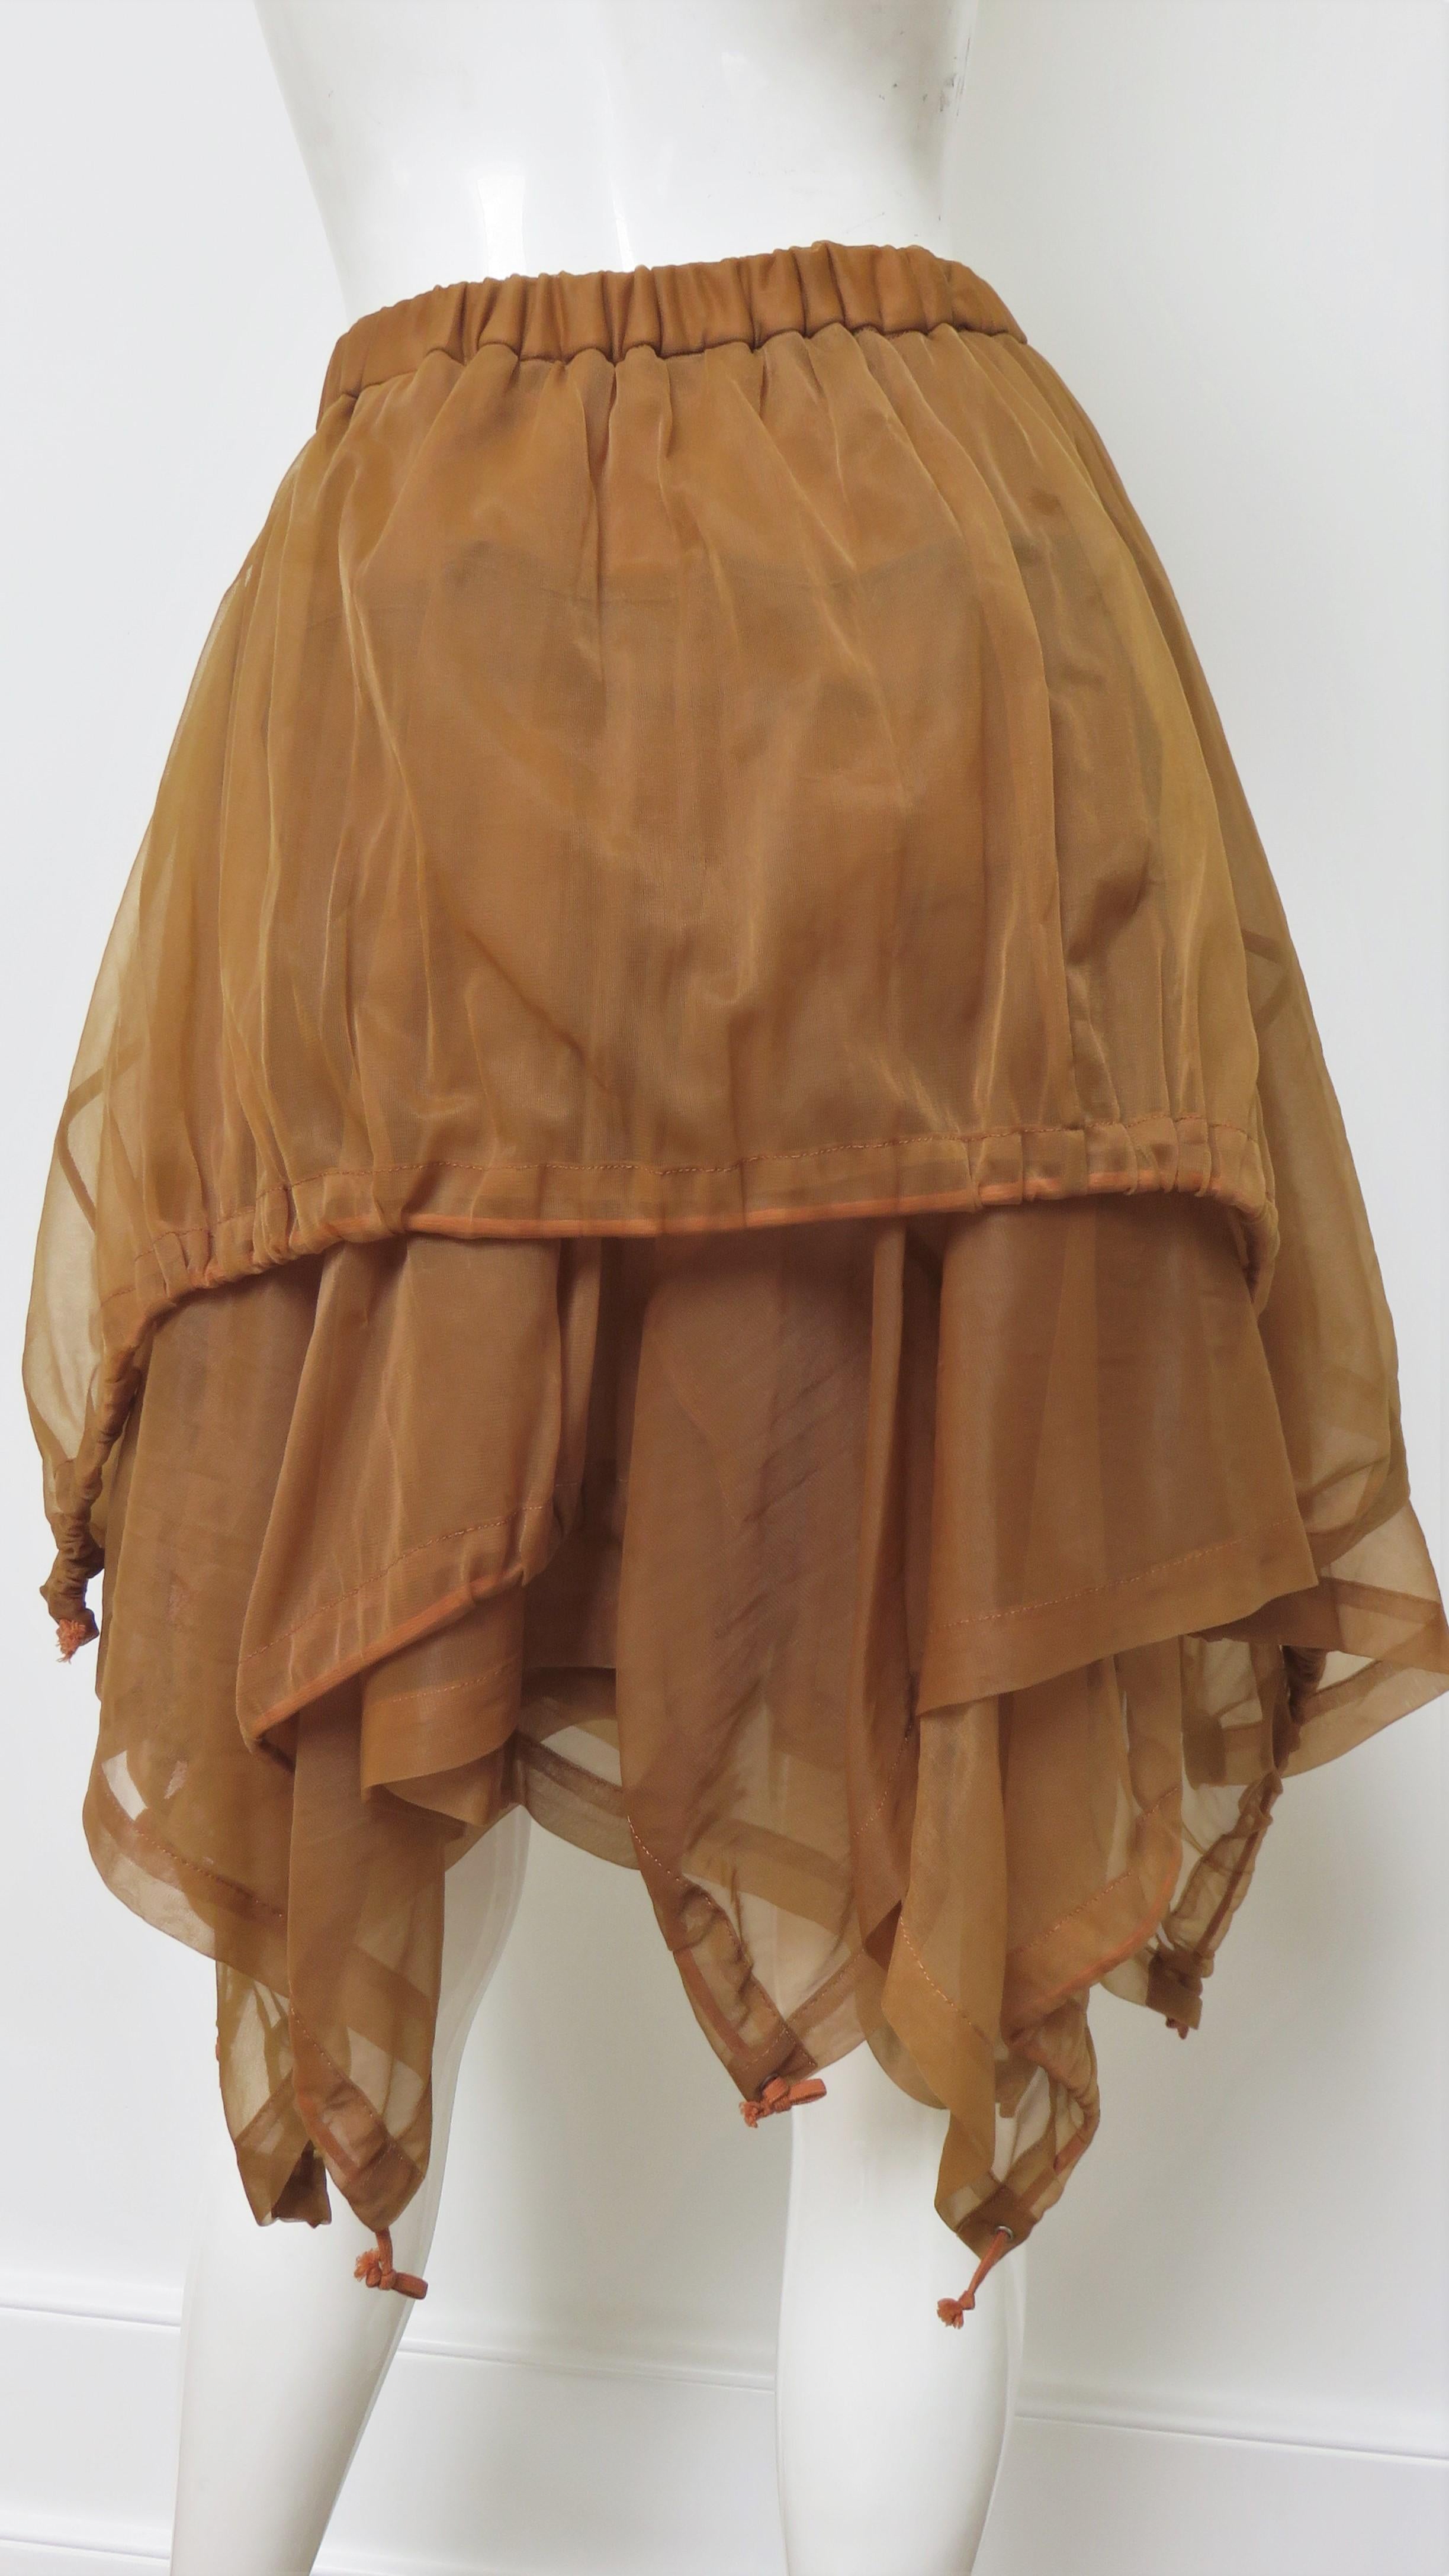 Comme des Garcons Parachute Skirt AD 1990 In Good Condition For Sale In Water Mill, NY